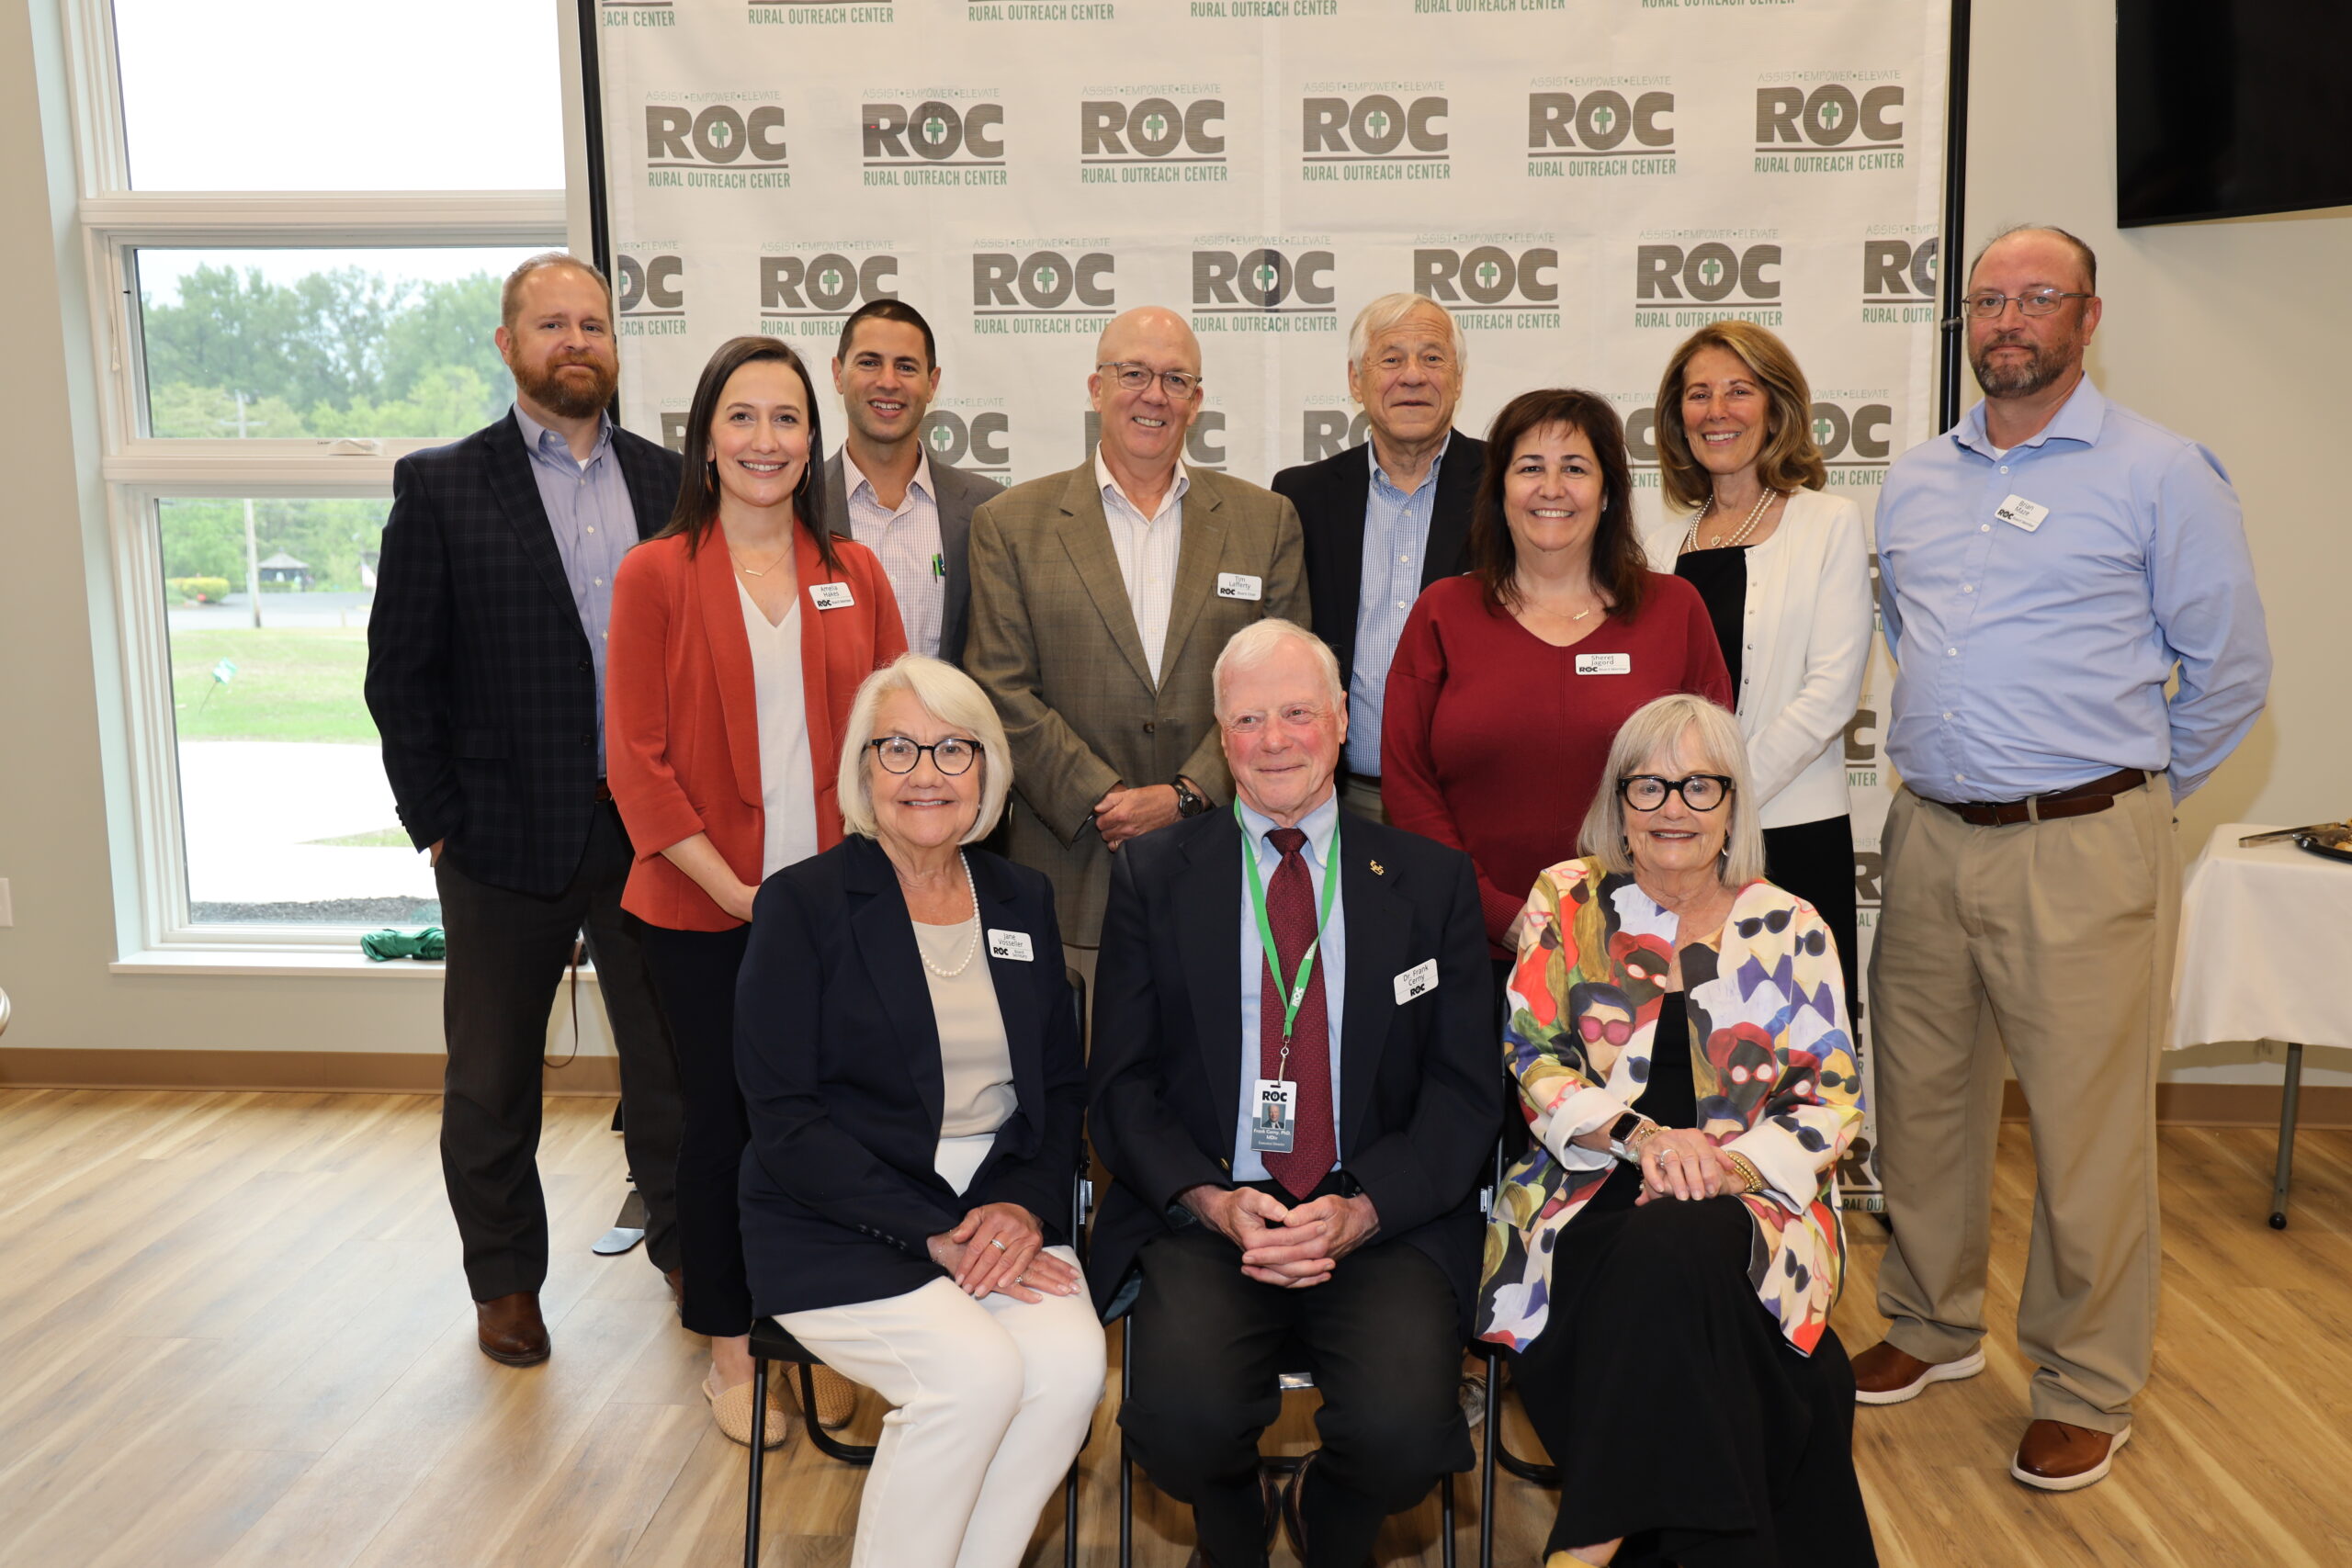 ROC board members at the Opening Celebration